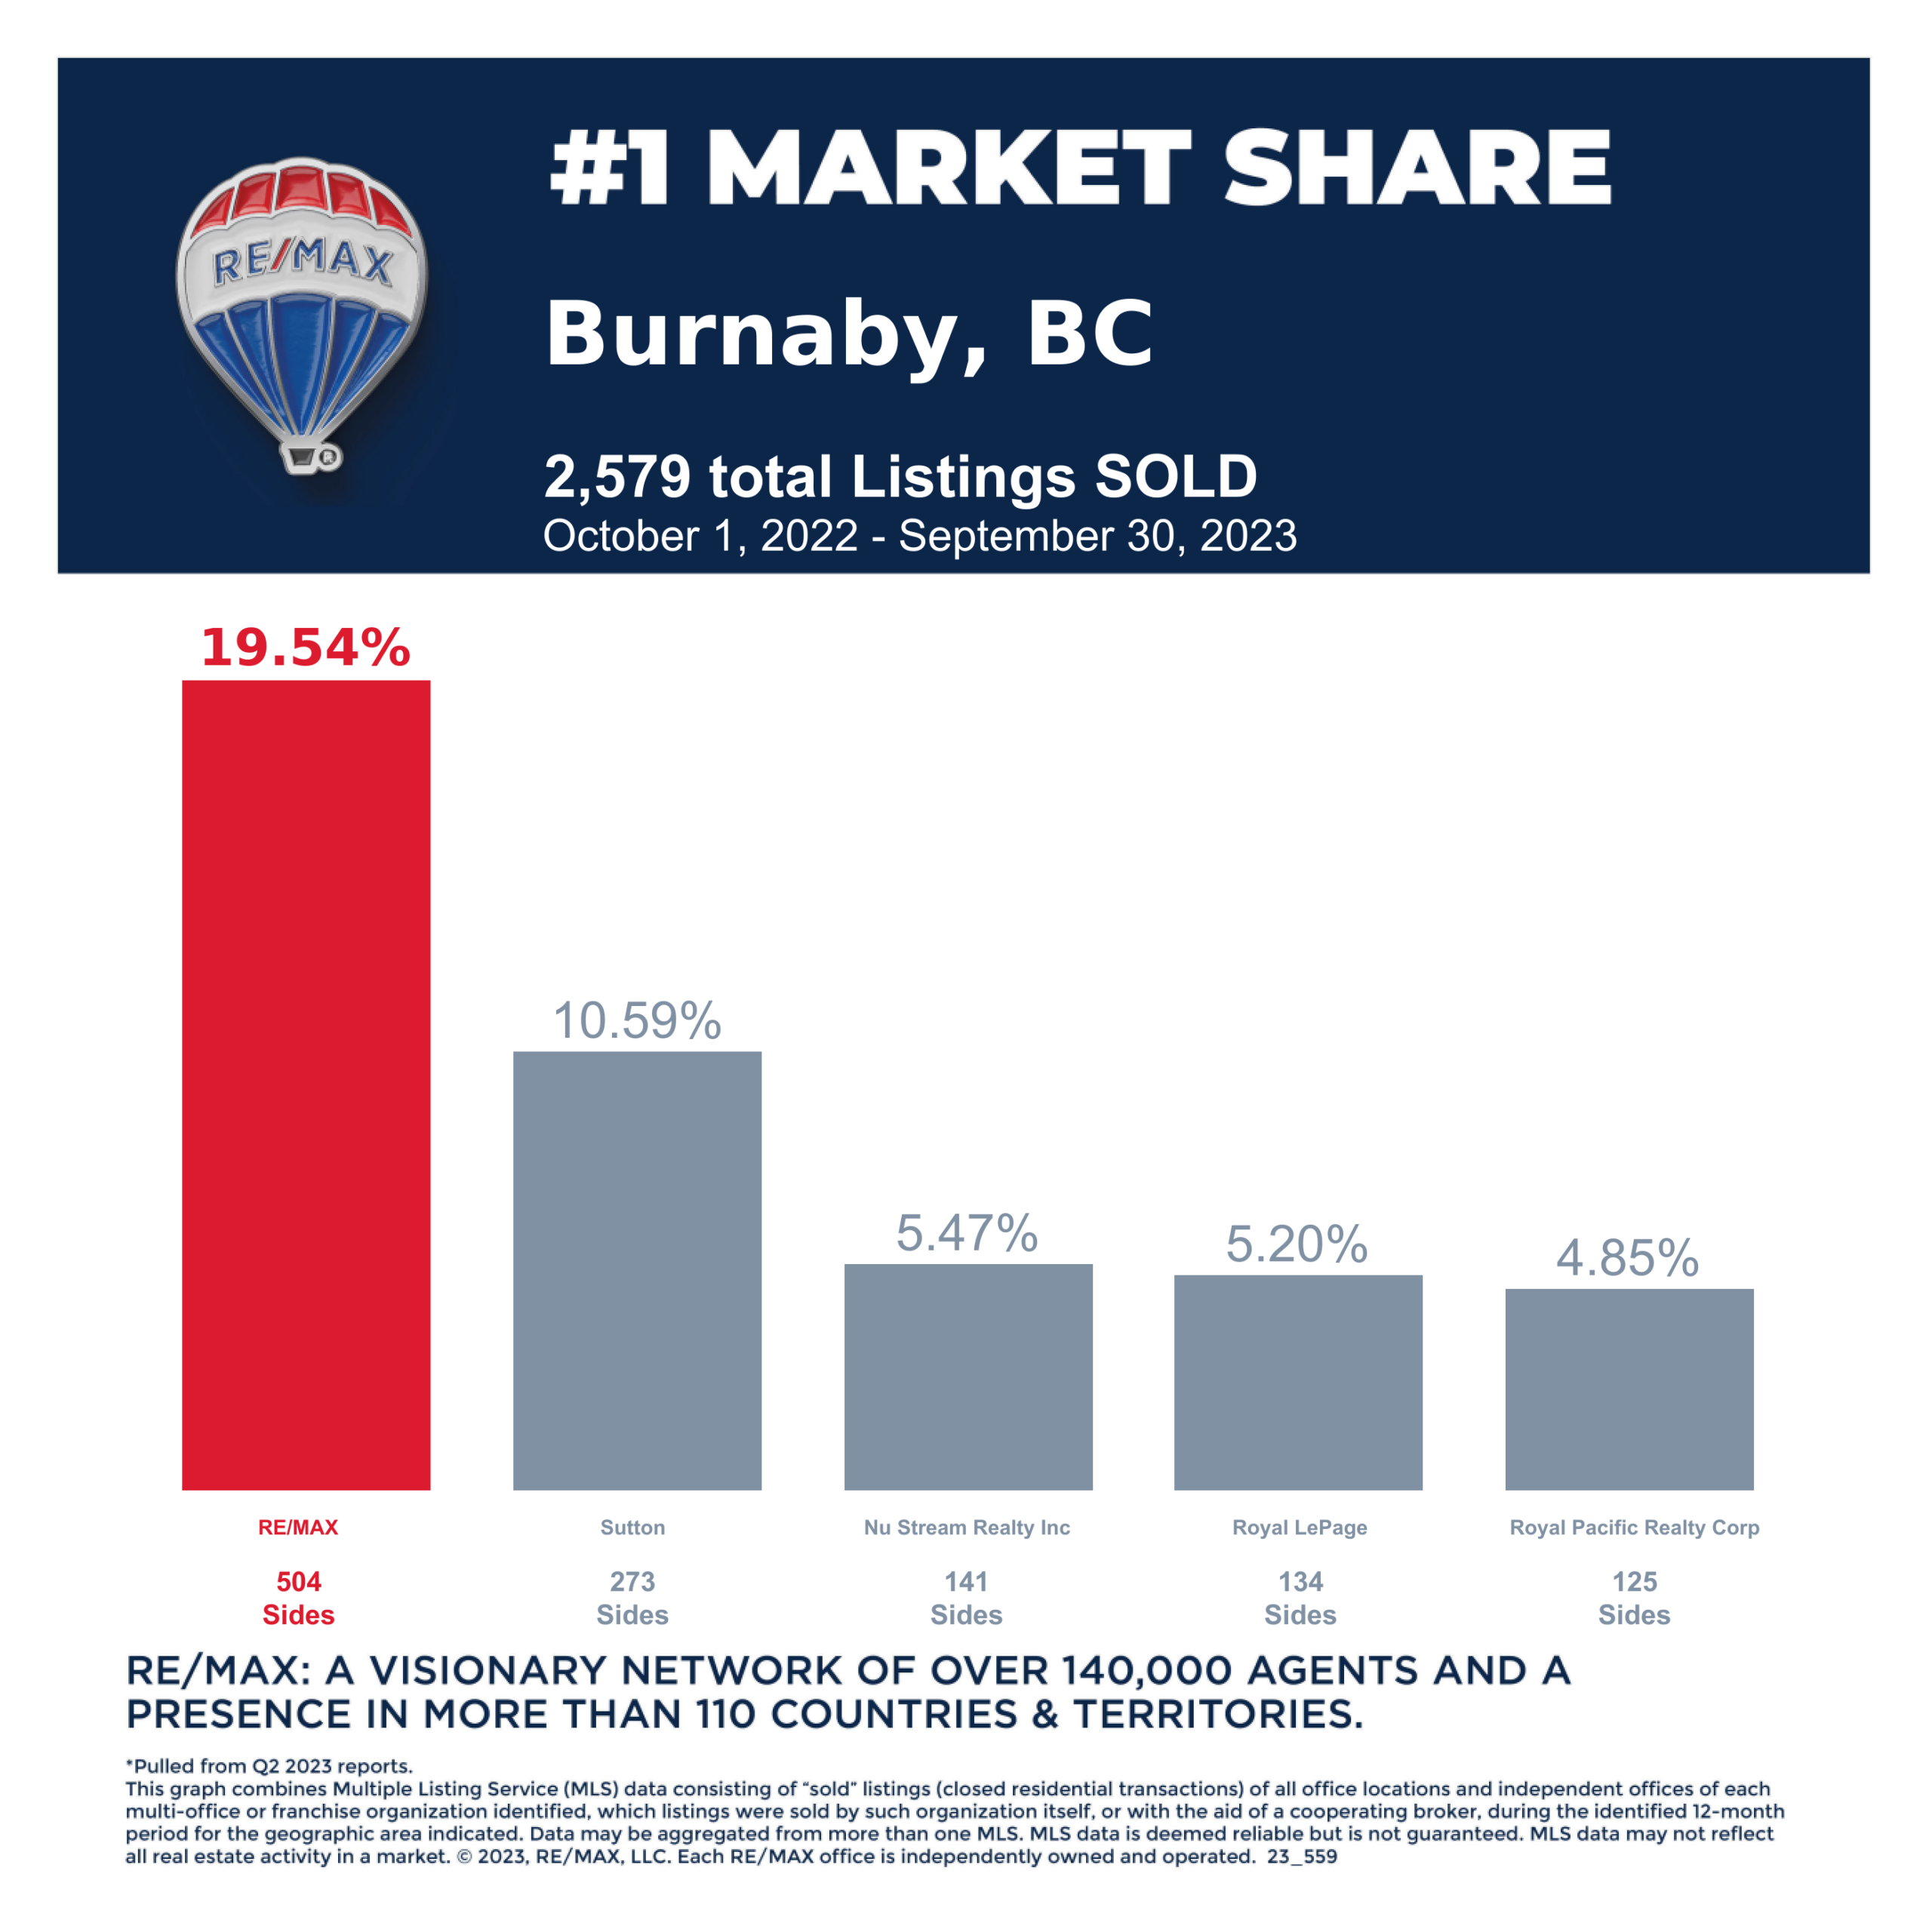 Remax Burnaby Real Estate Market Share